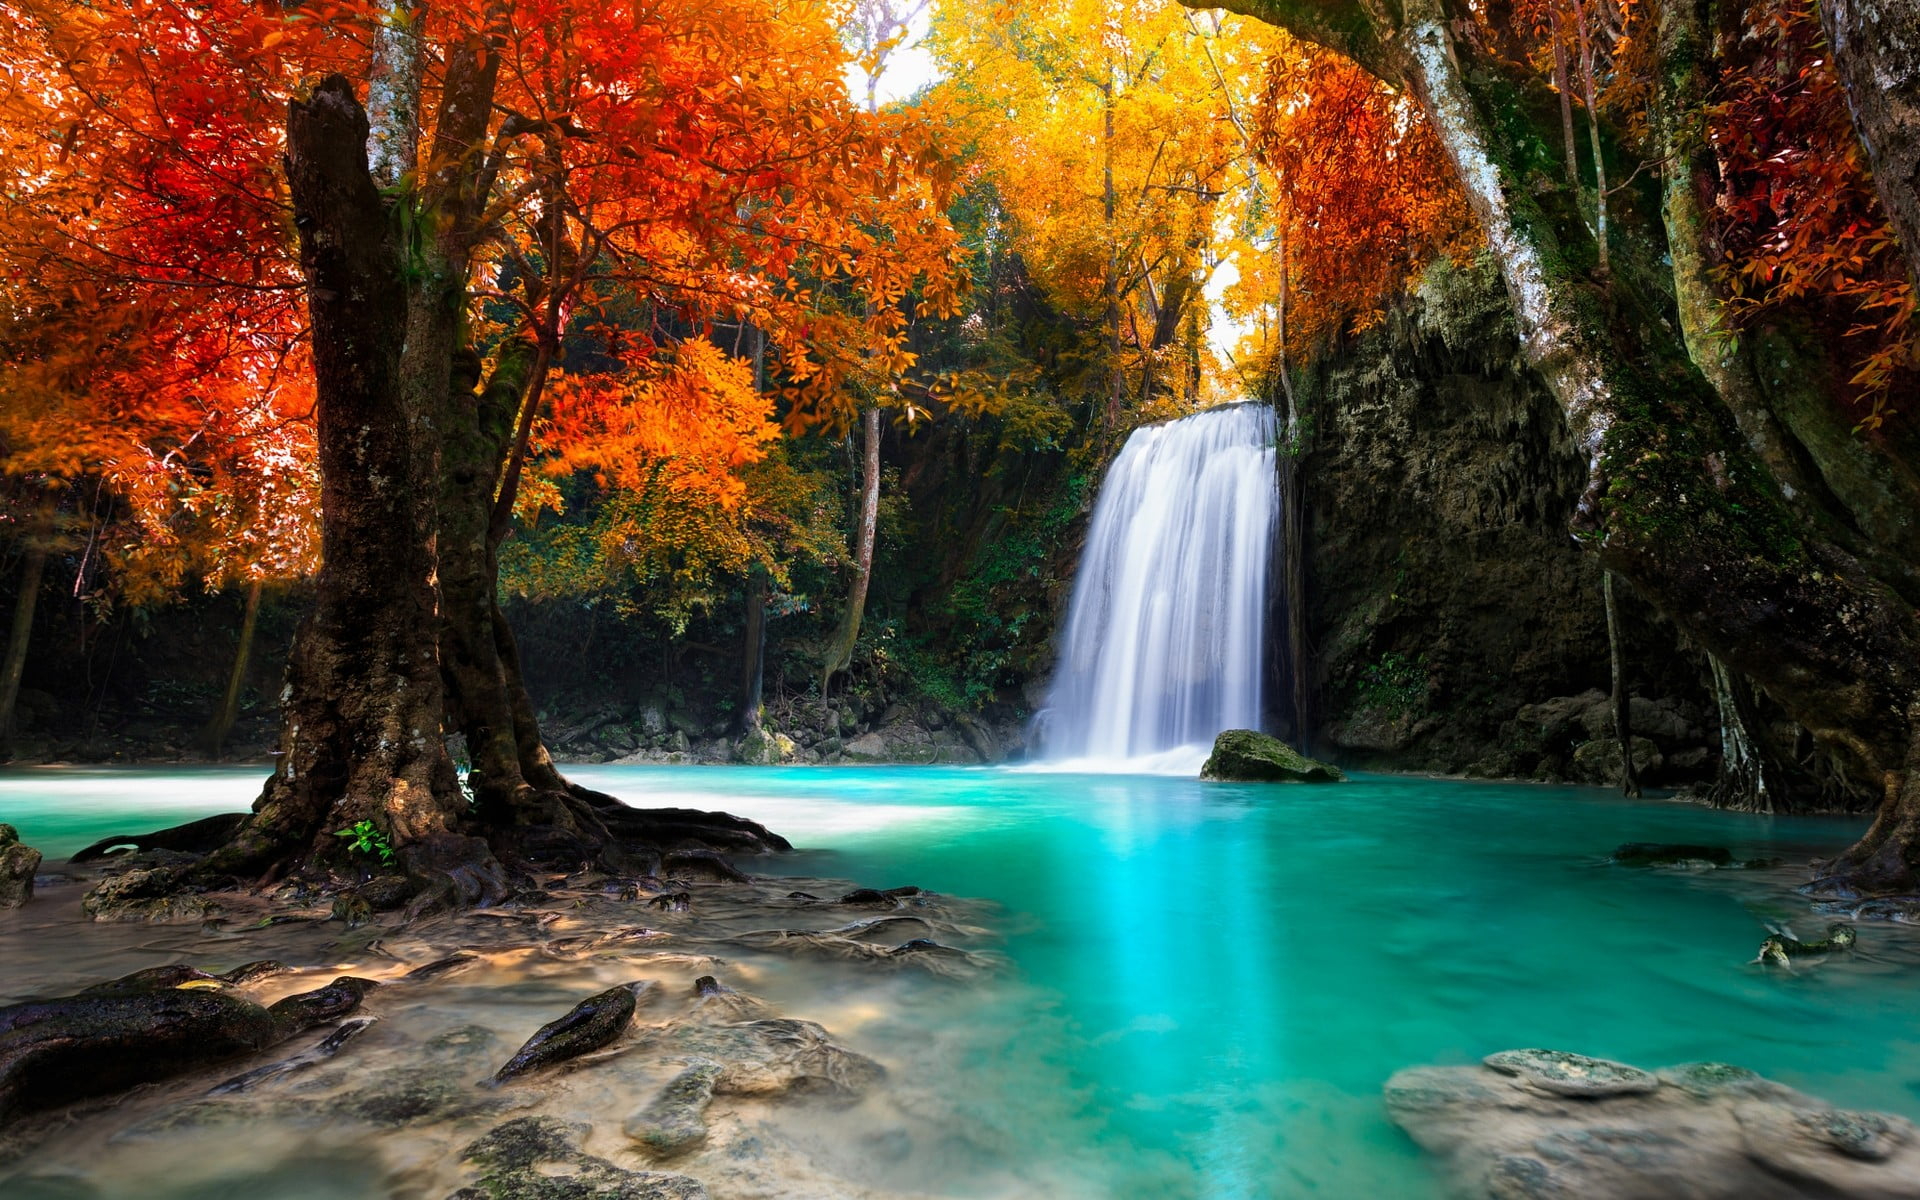 Wallpaper Waterfalls Surrounded By Trees, Autumn 2022 Wallpaper, Nature